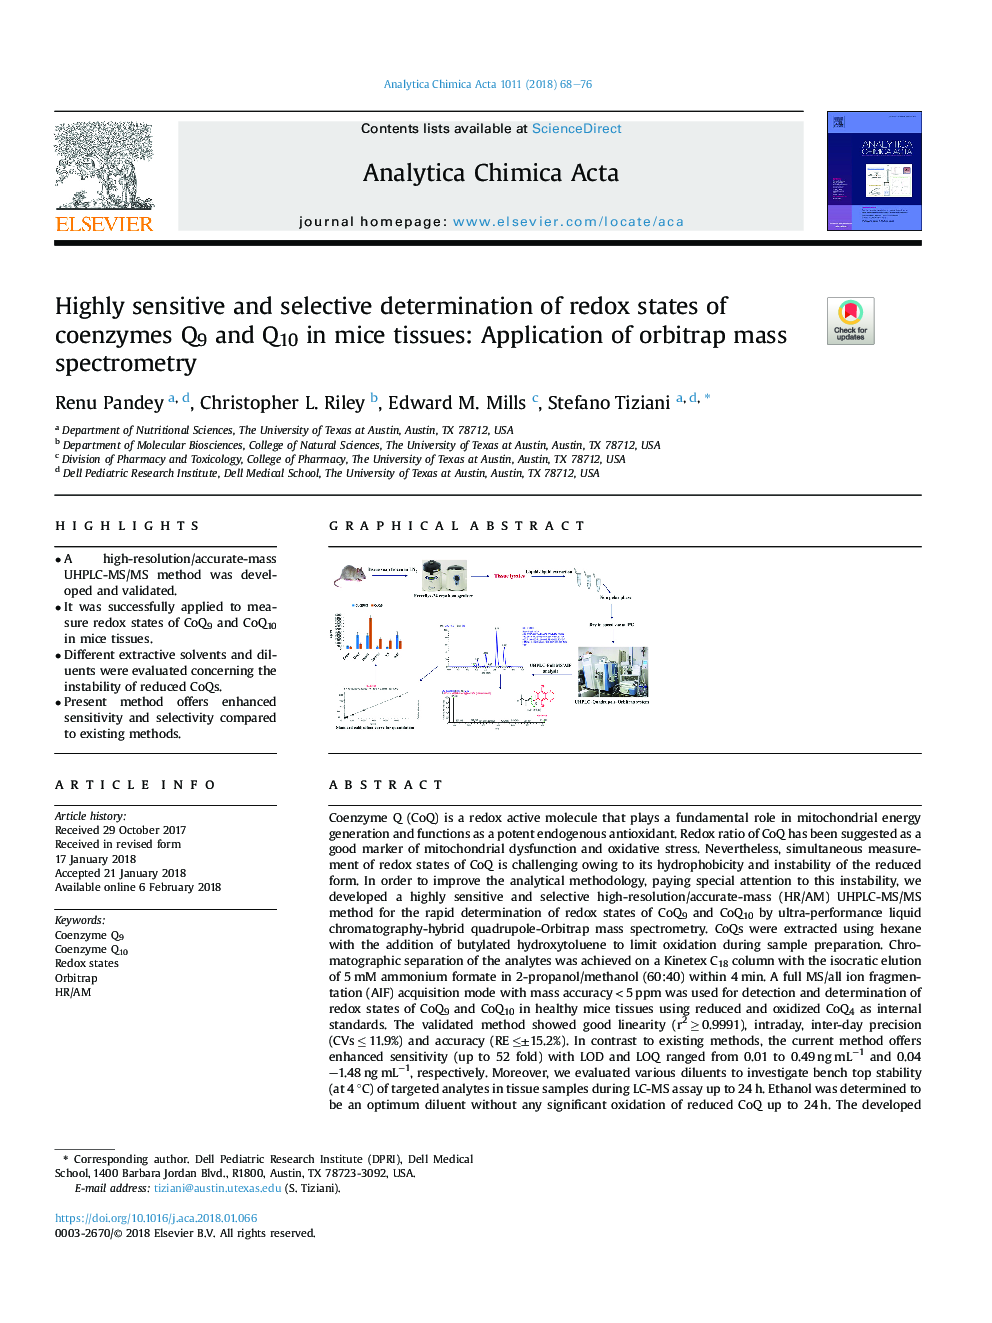 Highly sensitive and selective determination of redox states of coenzymes Q9 and Q10 in mice tissues: Application of orbitrap mass spectrometry